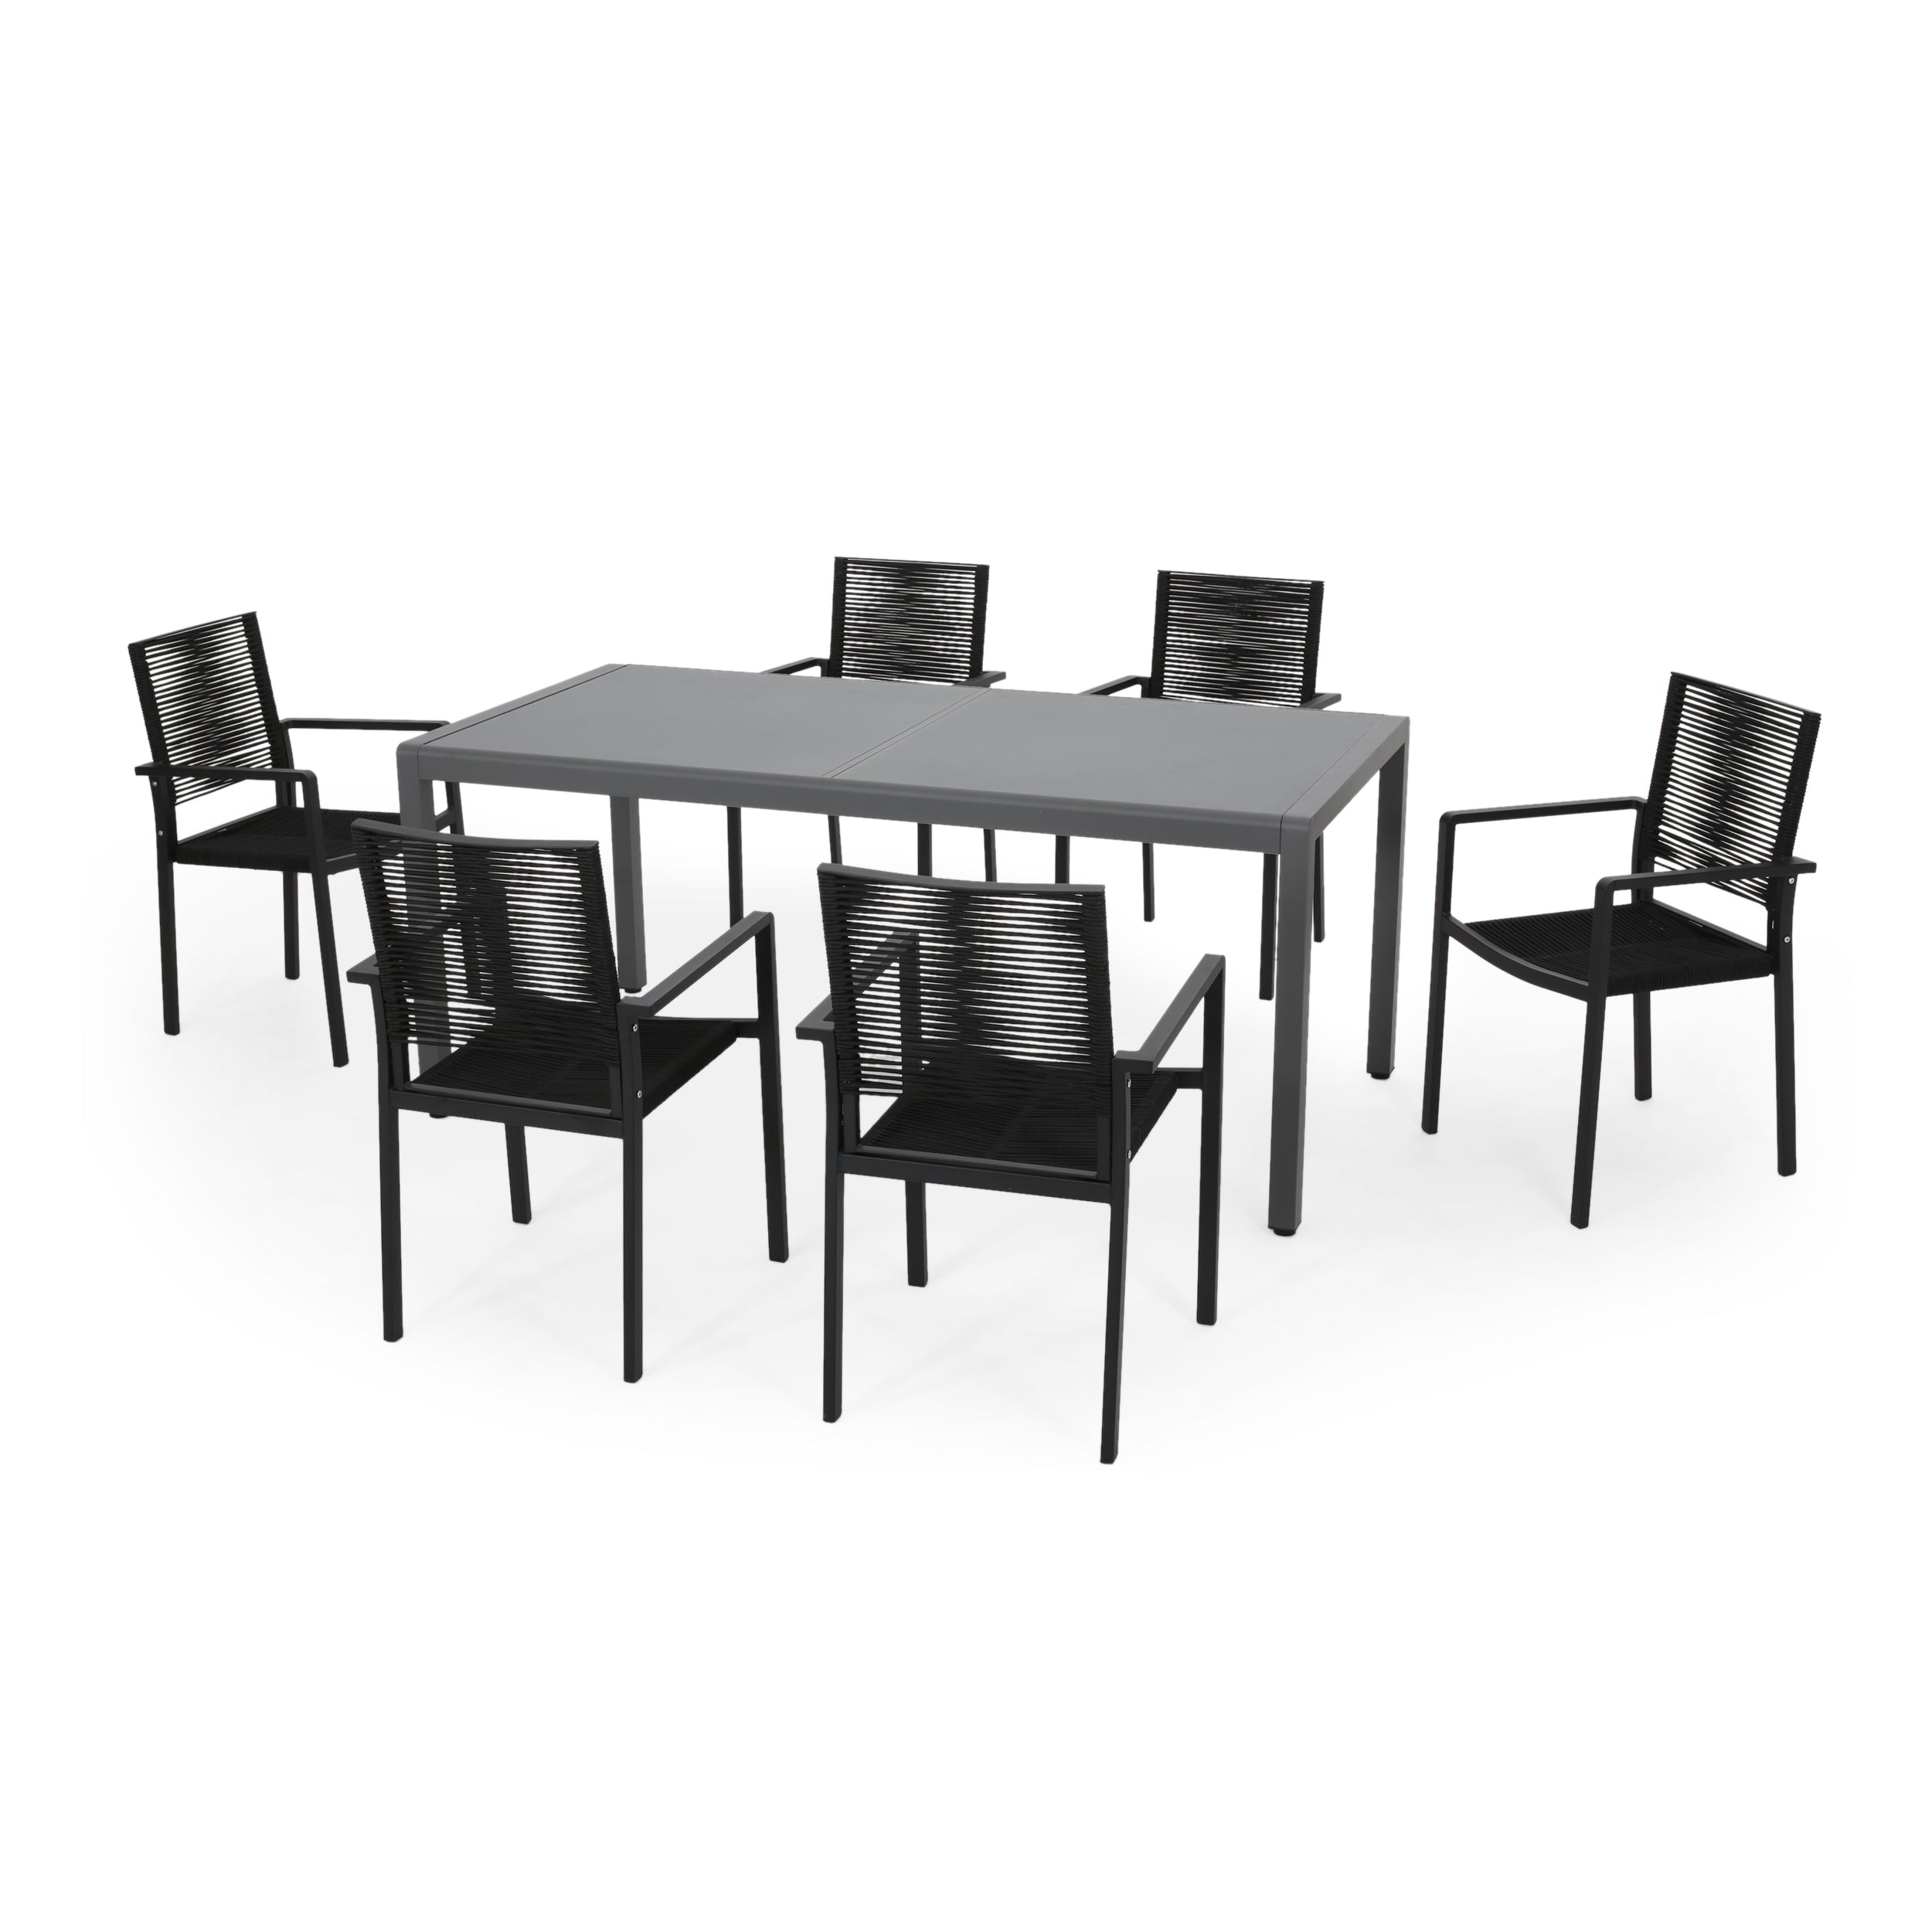 Aaleigha Outdoor Modern 6 Seater Aluminum Dining Set with Tempered Glass Table Top GraySilverDark Gray